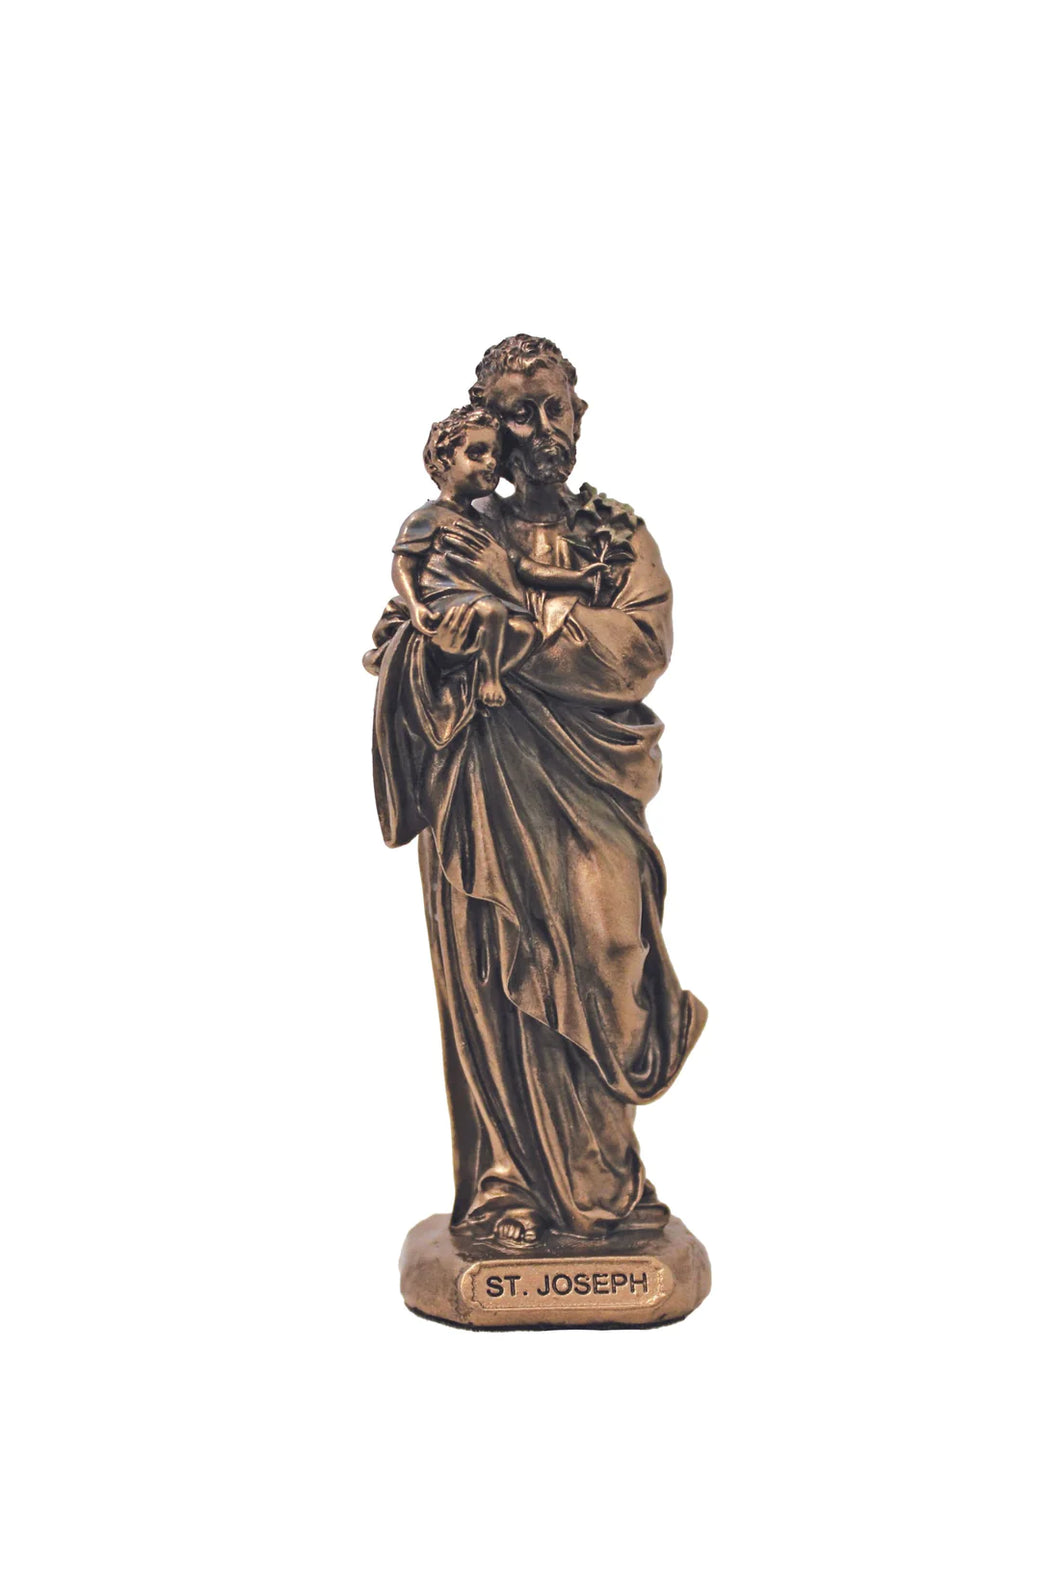 St. Joseph and Child in lightly hand-painted cold cast bronze